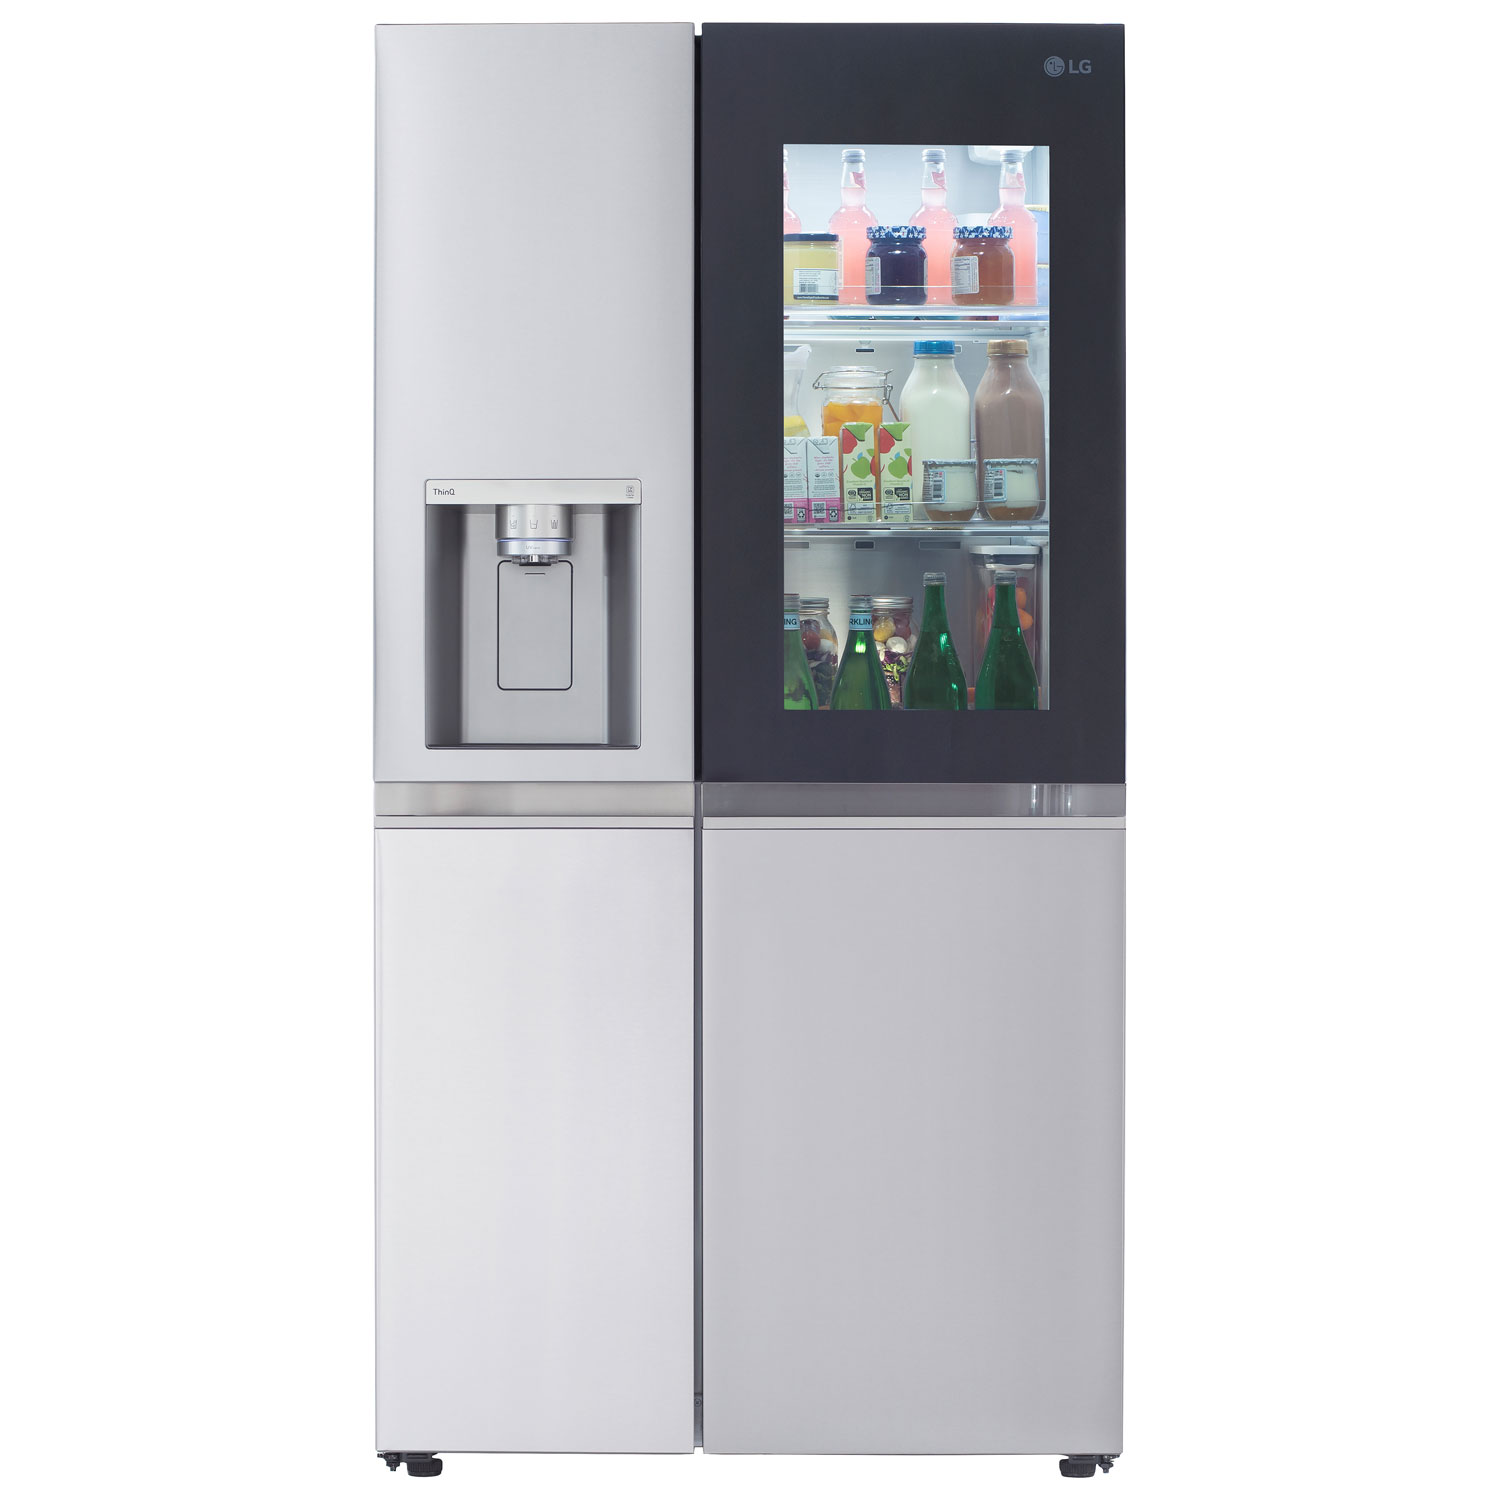 LG 36" 27.1 Cu. Ft. French Side-by-Side Refrigerator with Water & Ice Dispenser (LRSOS2706S) - Stainless Steel